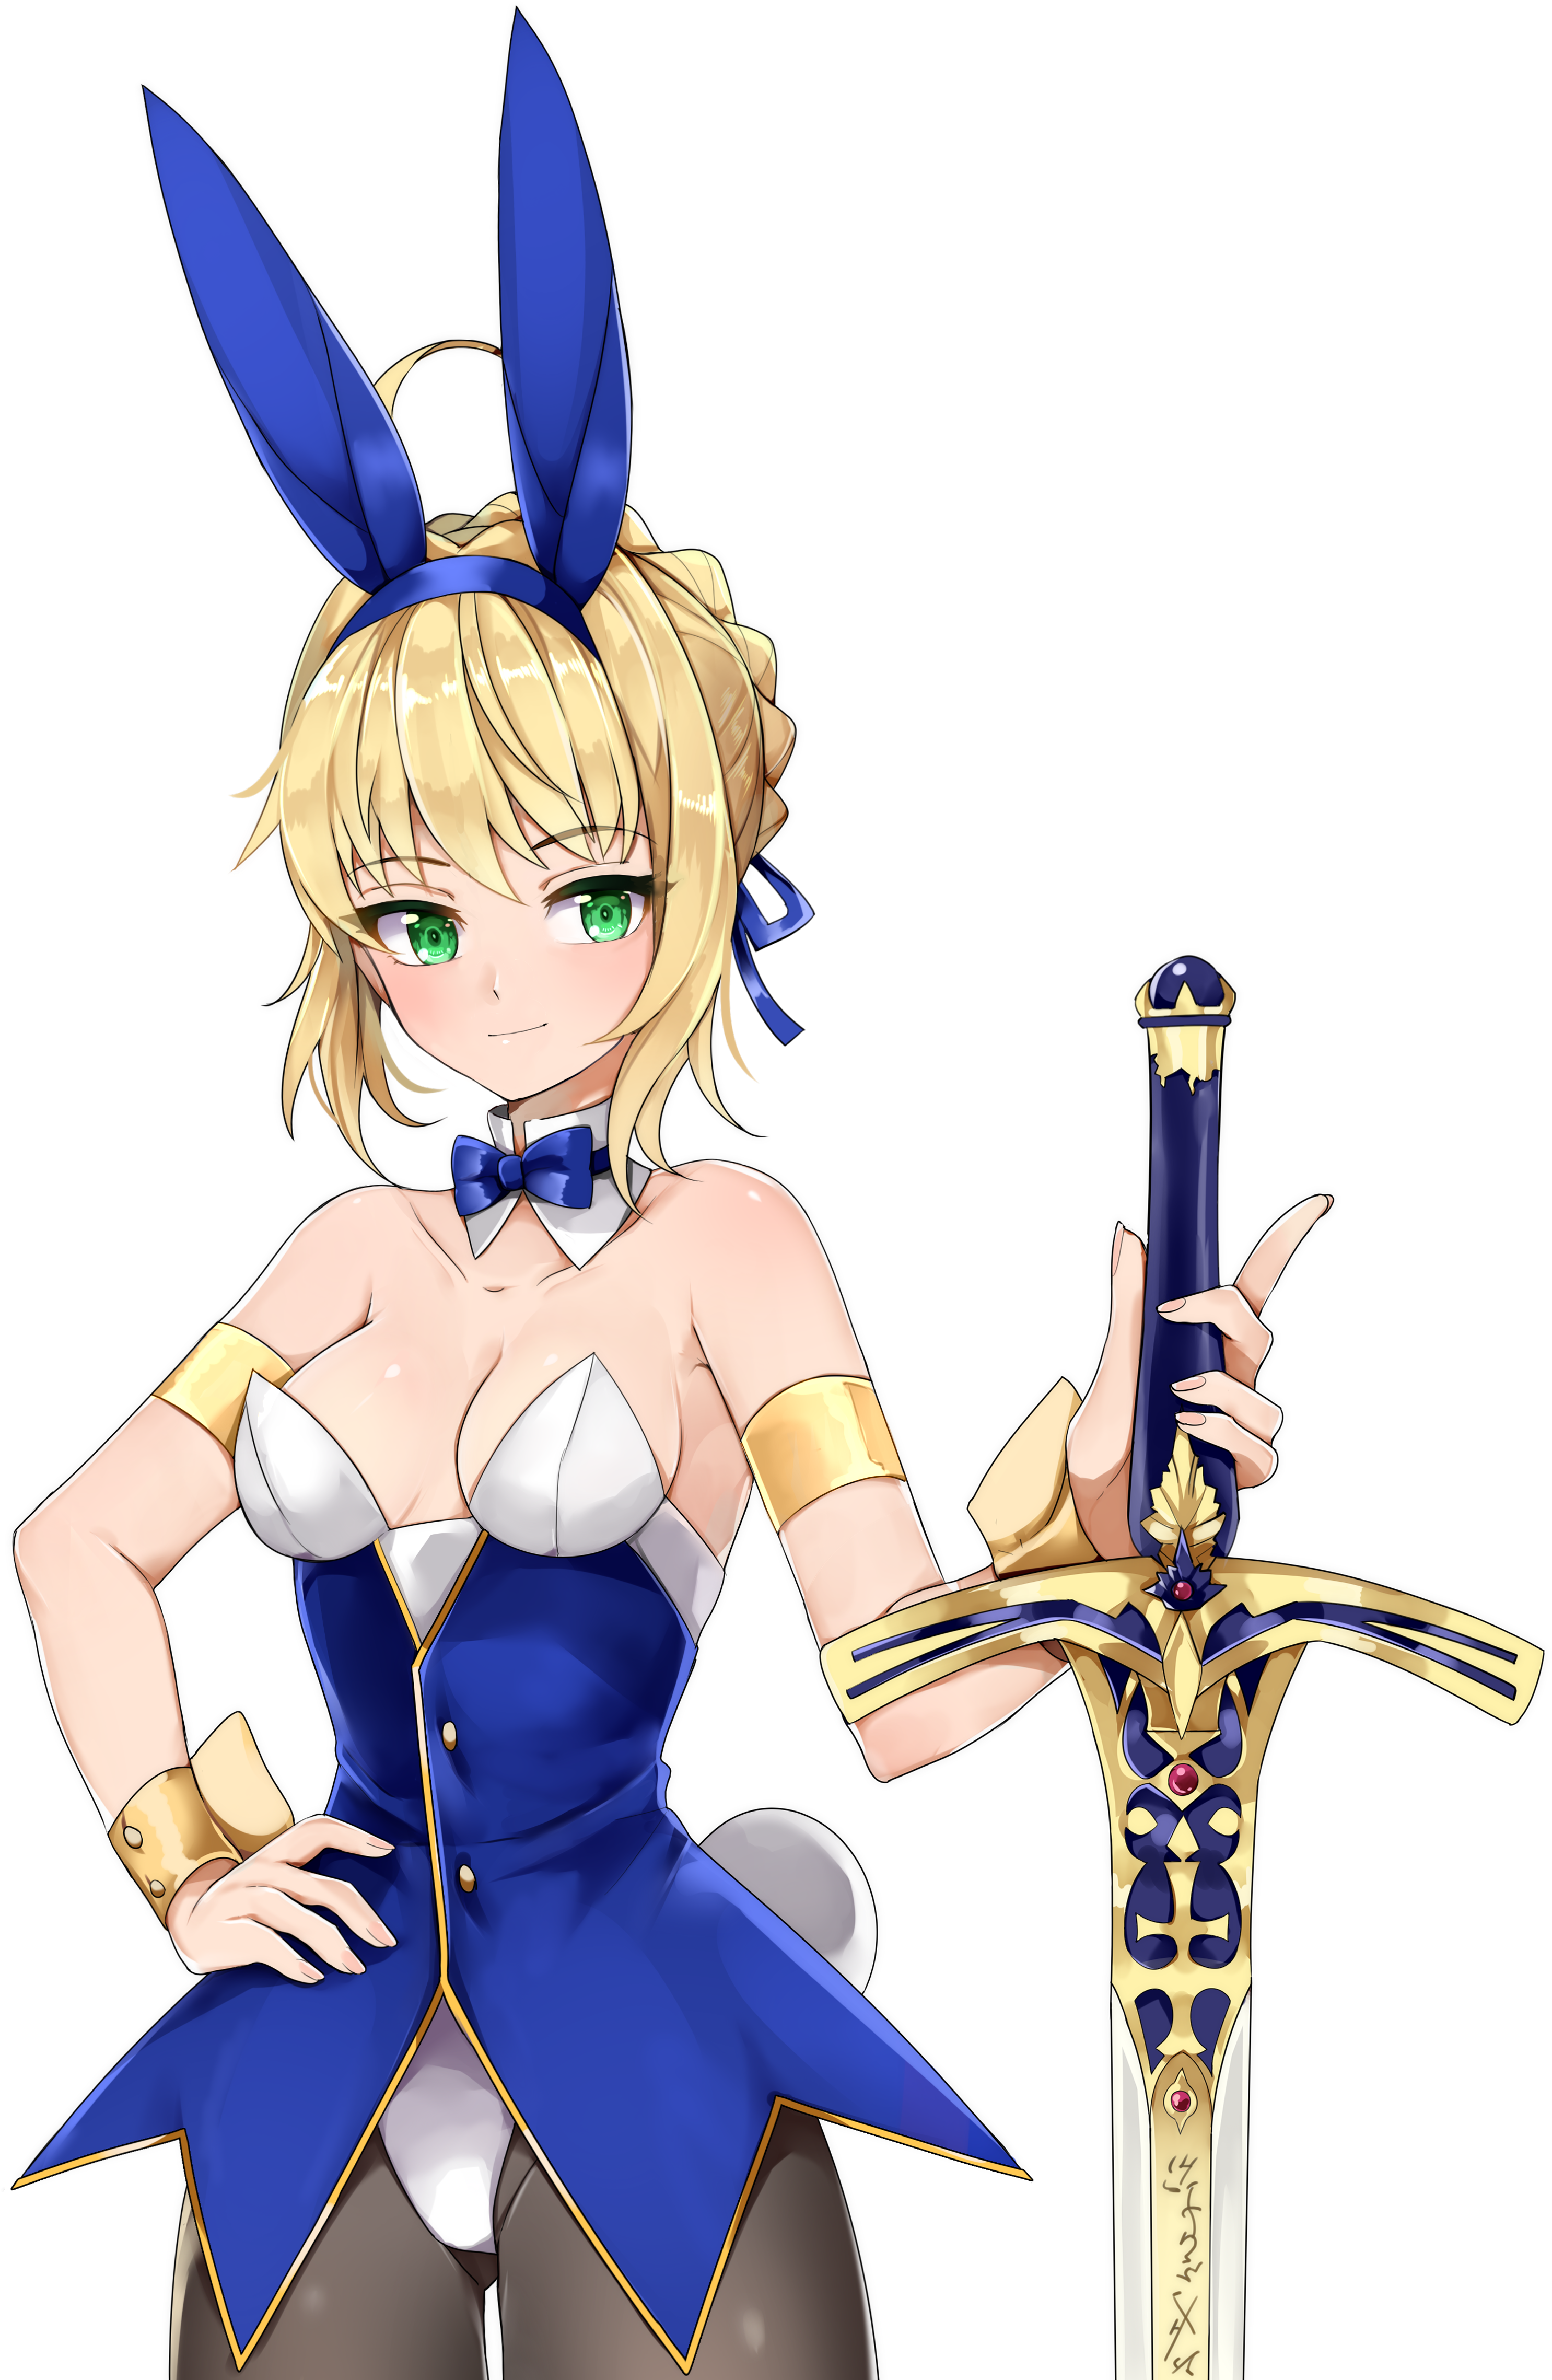 Bunny Eared Saberwith Sword